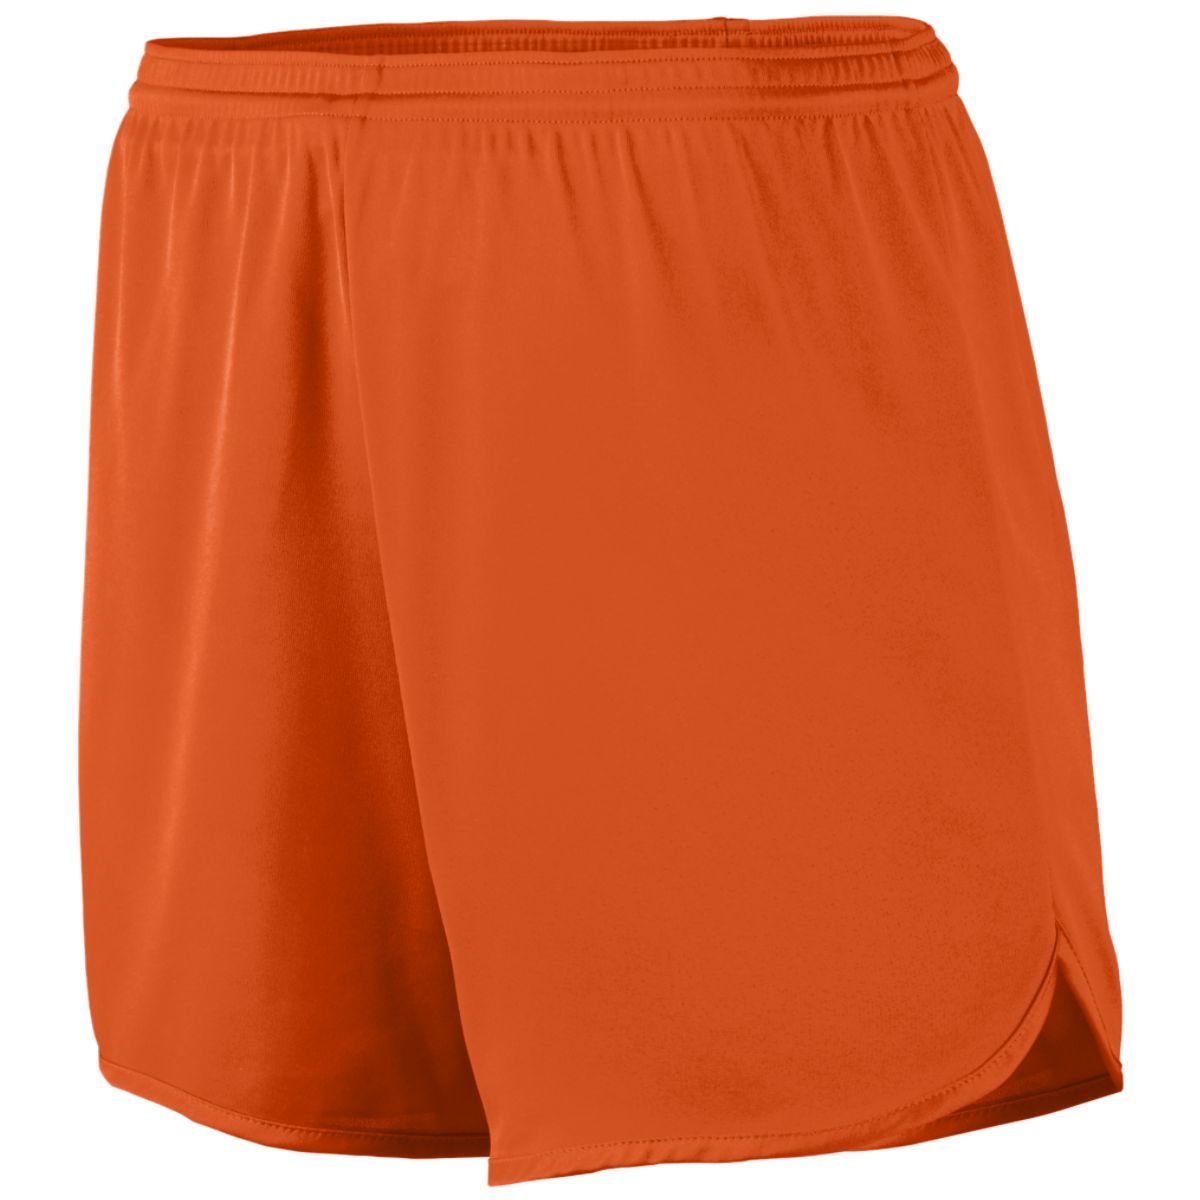 Youth Accelerate Shorts - 356